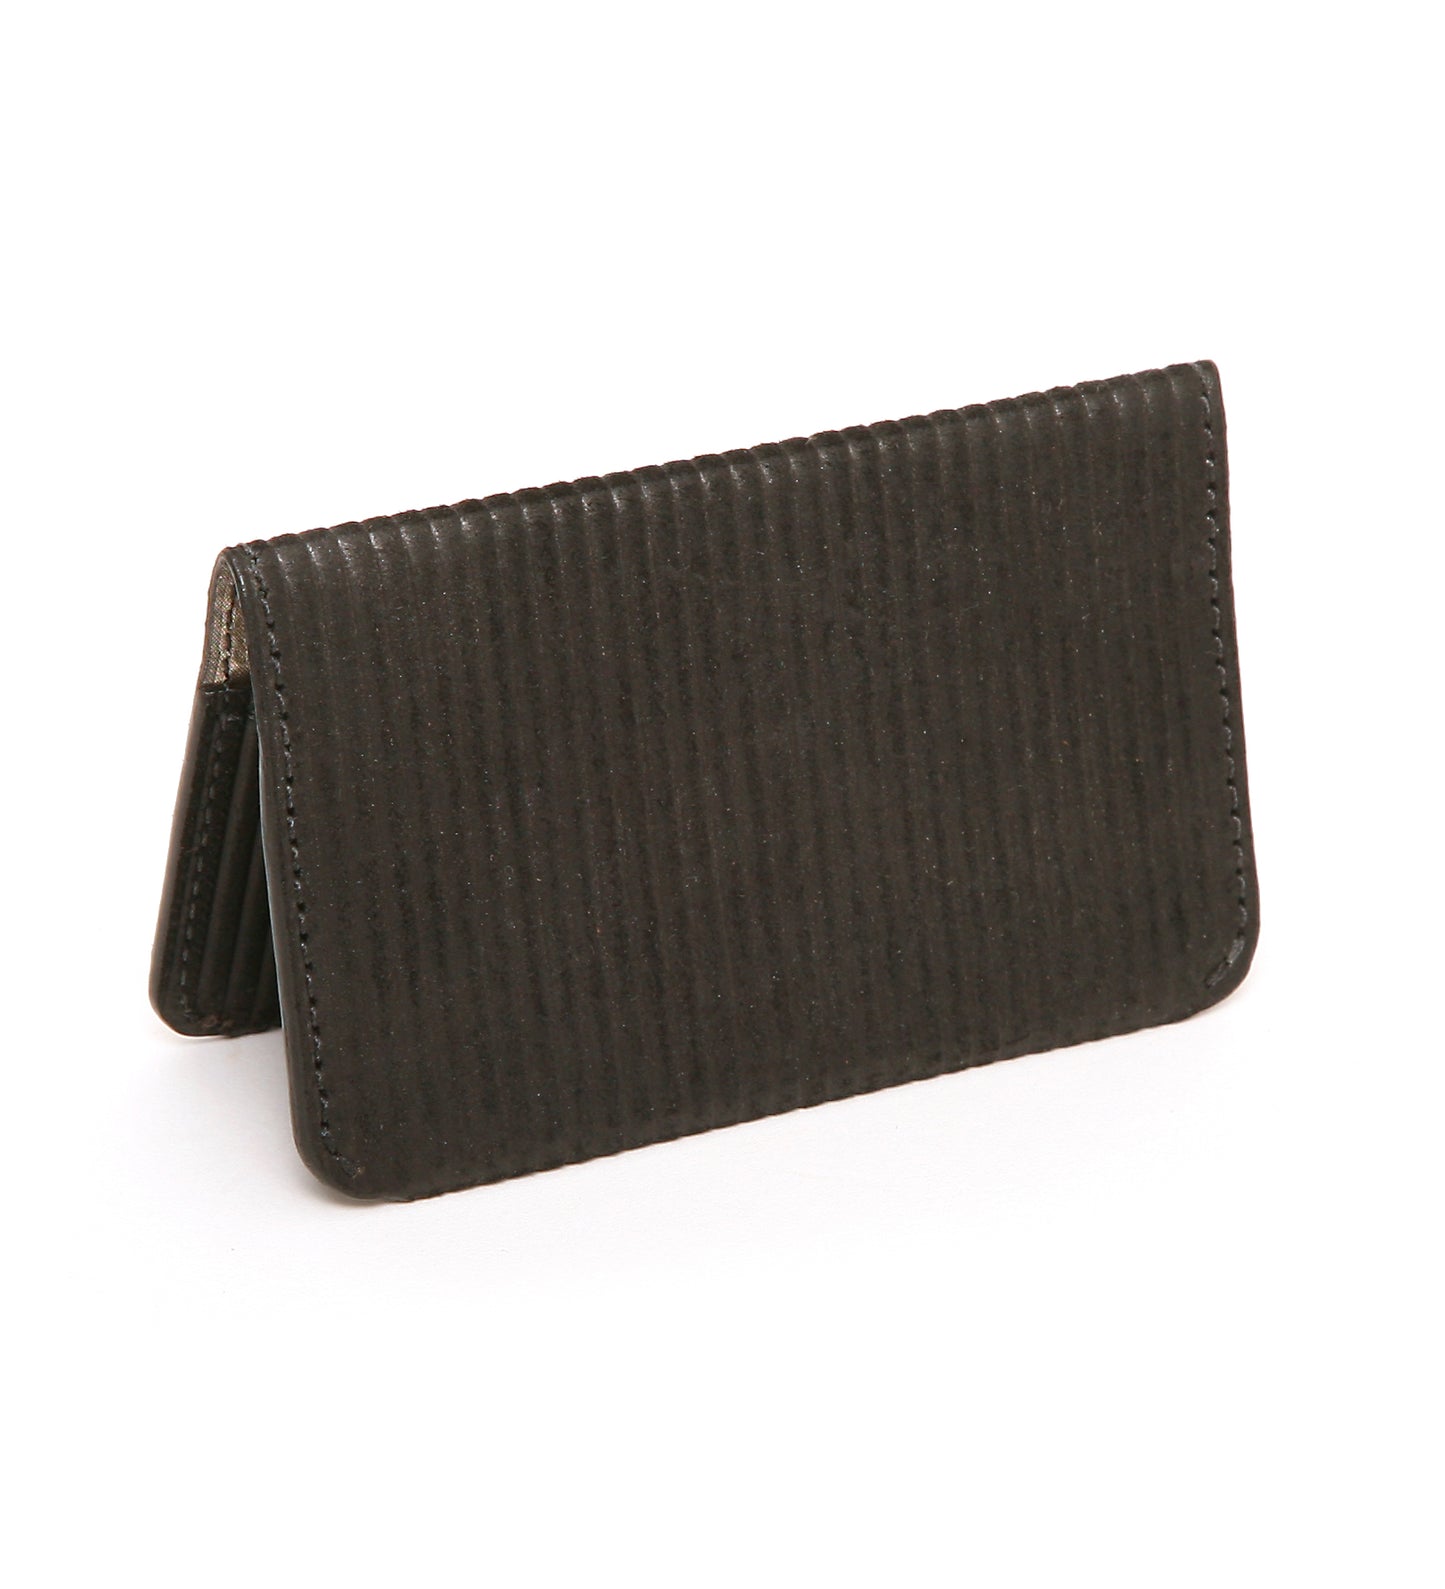 JUNO card case lined